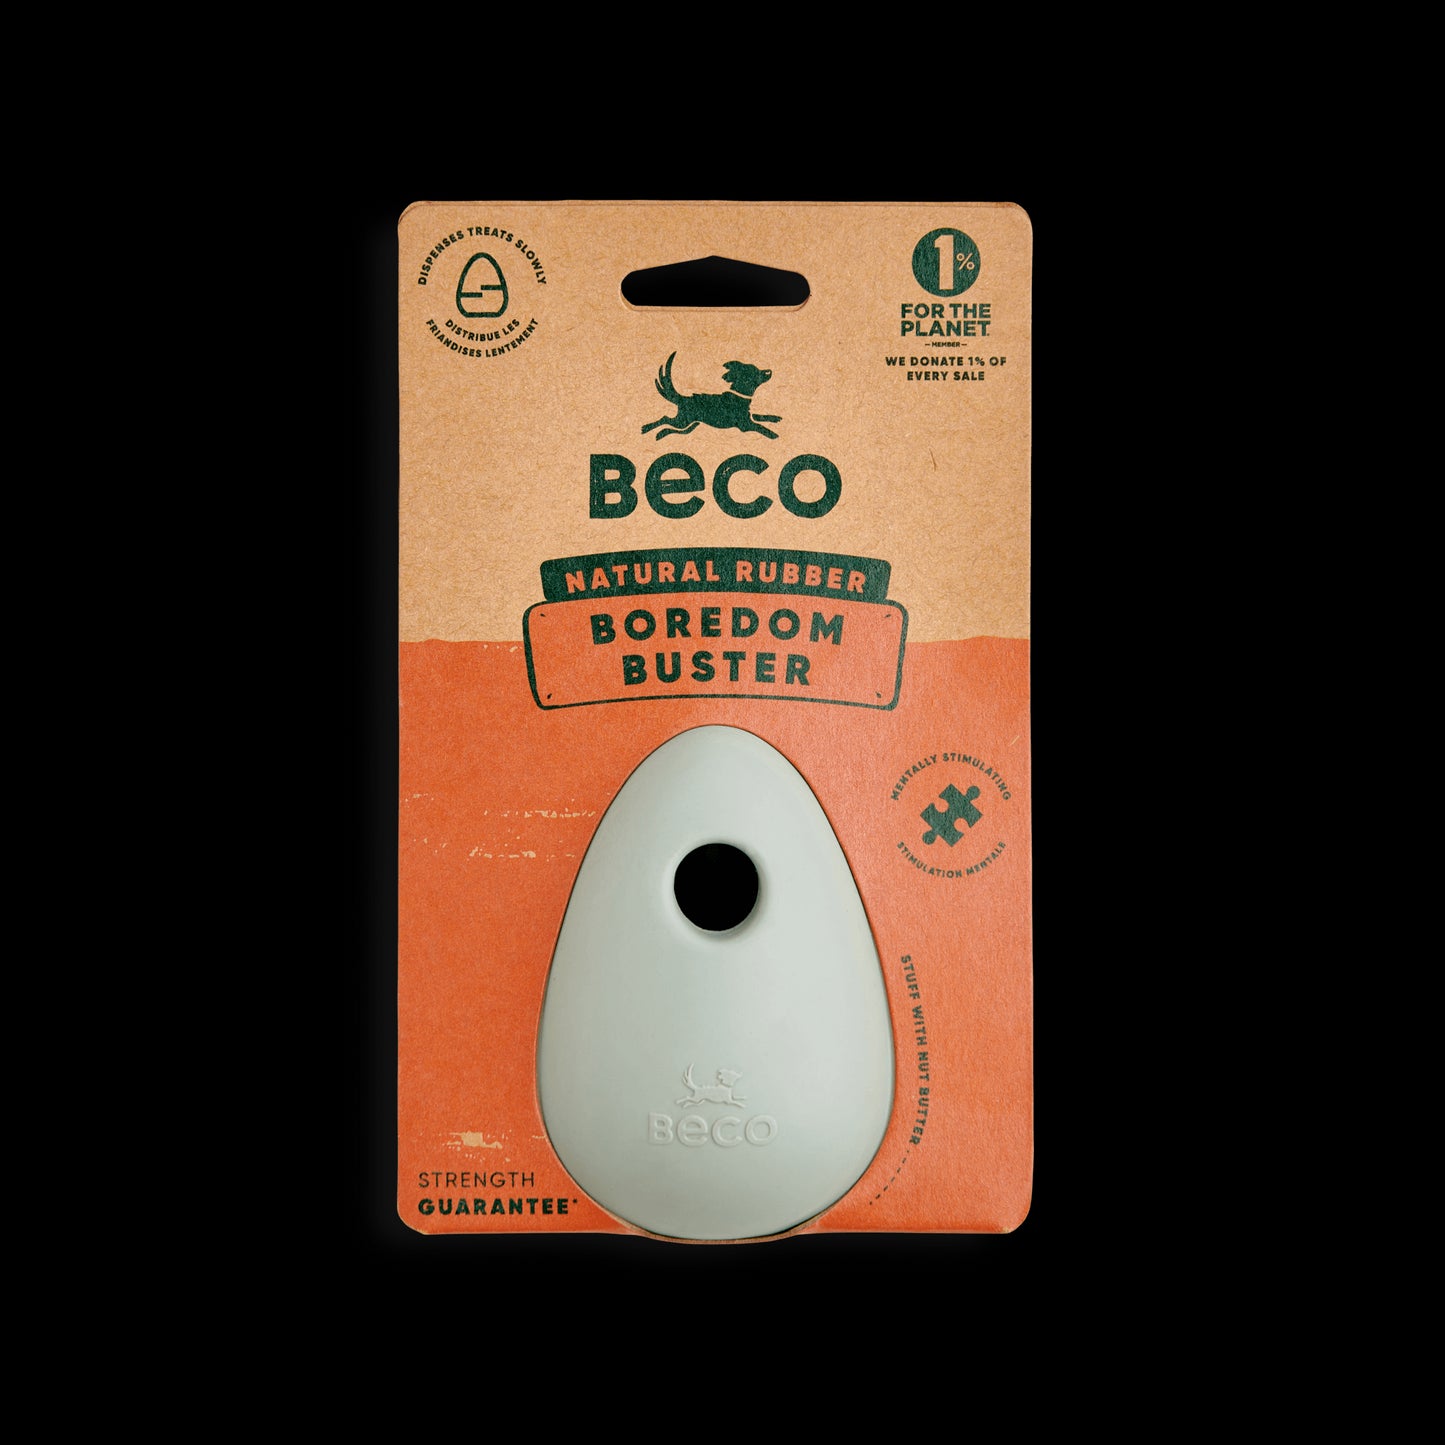 Beco Rubber Boredom Buster Enrichment Toy